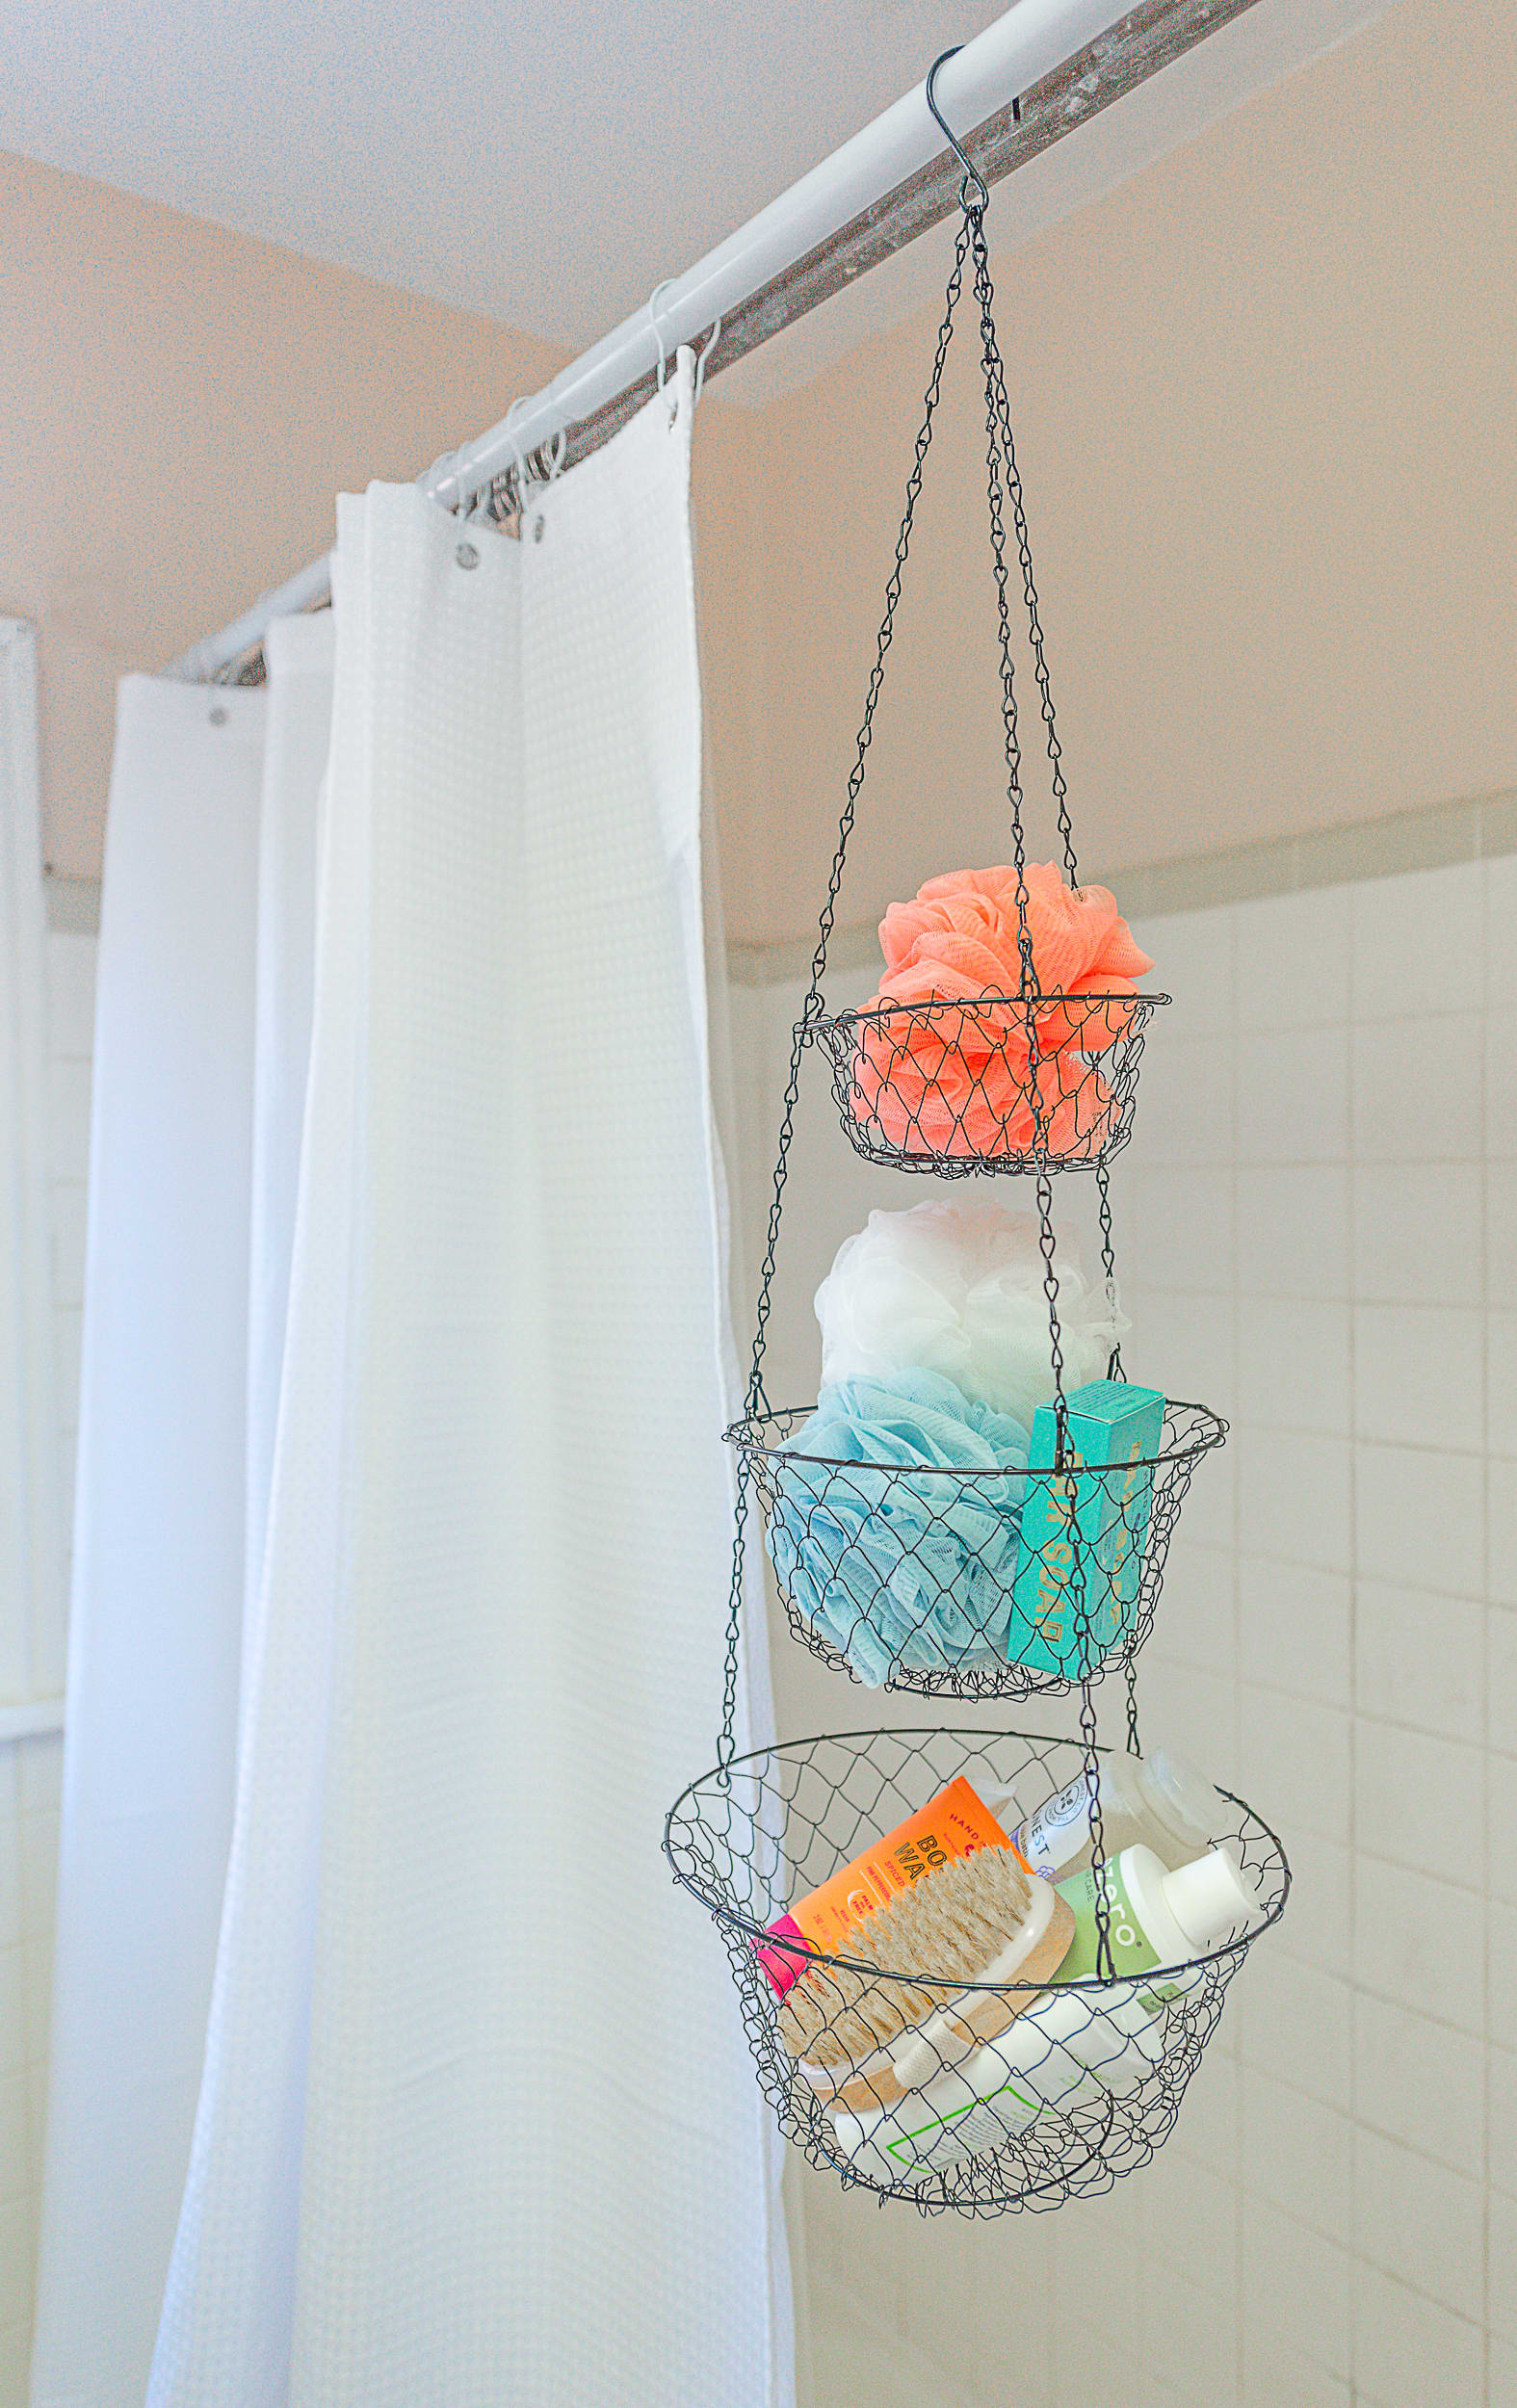 Best Shower Storage Ideas - Organizing Solutions for Shower Walls %%sep%%  %%sitename%%